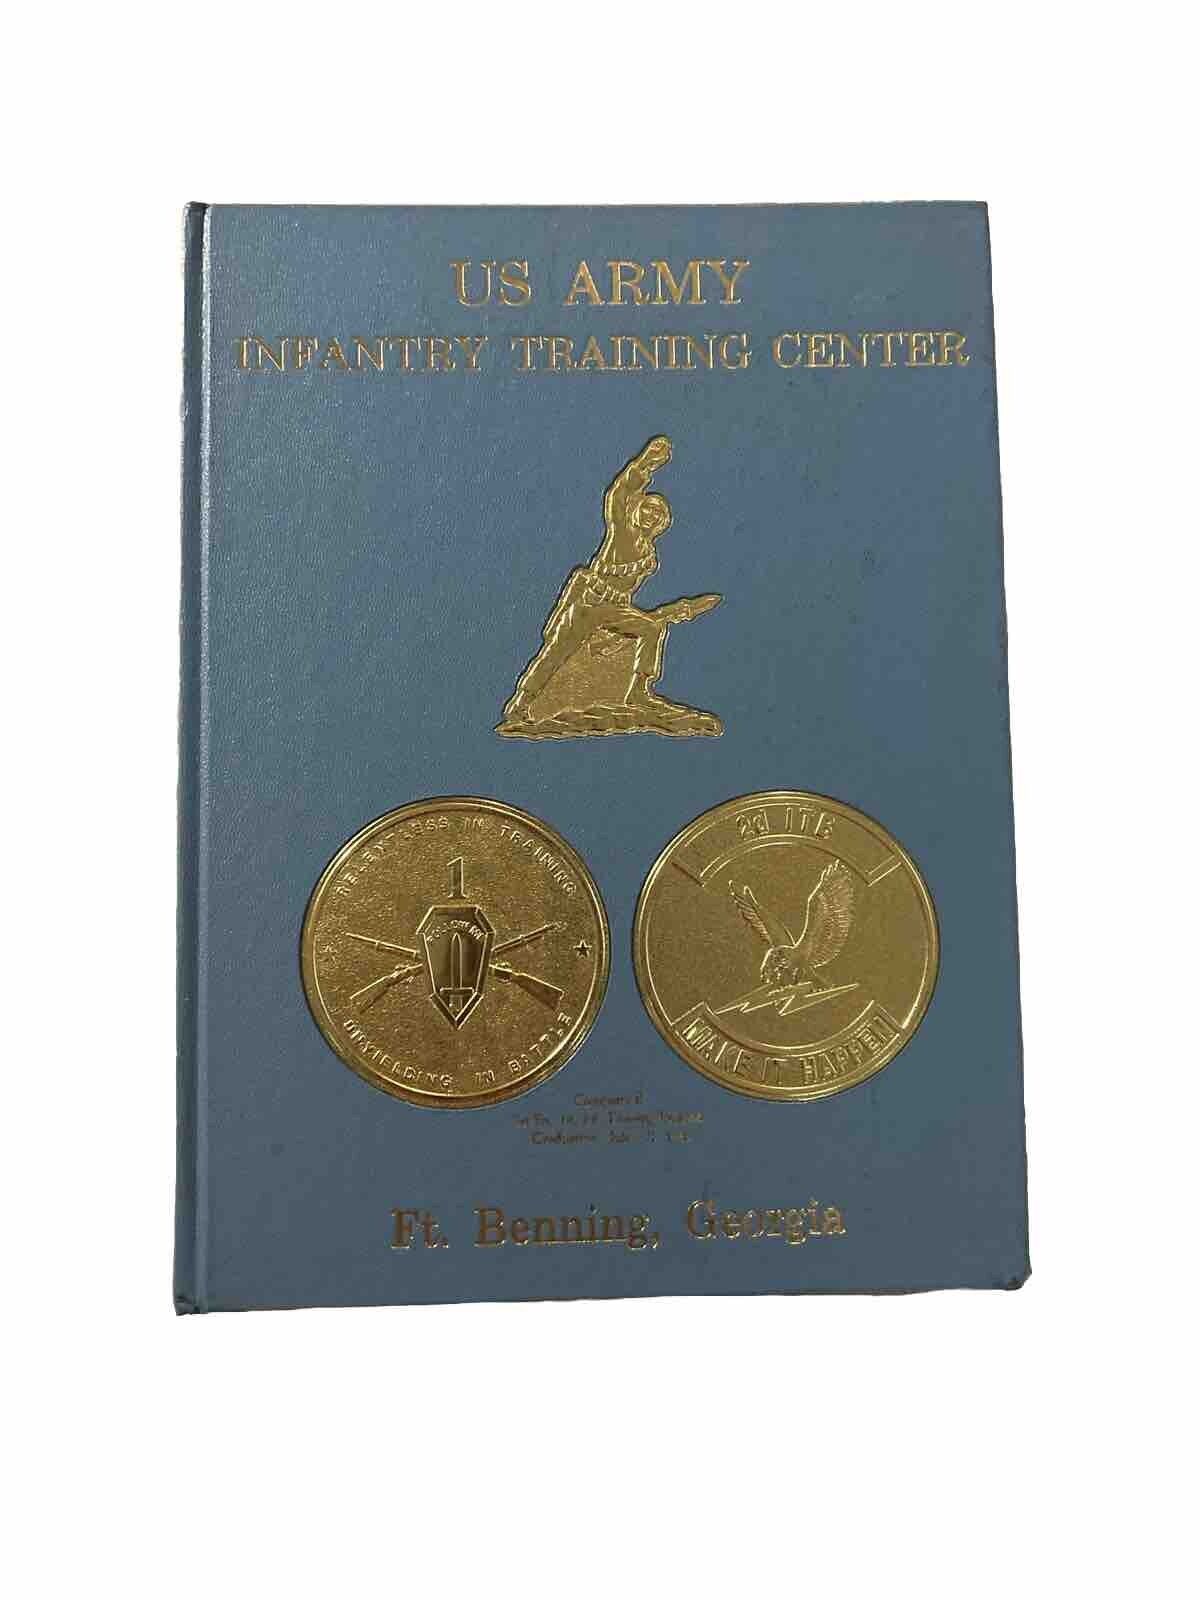 1987 Fort Benning Georgia US Army Infantry Training Center Yearbook Company B